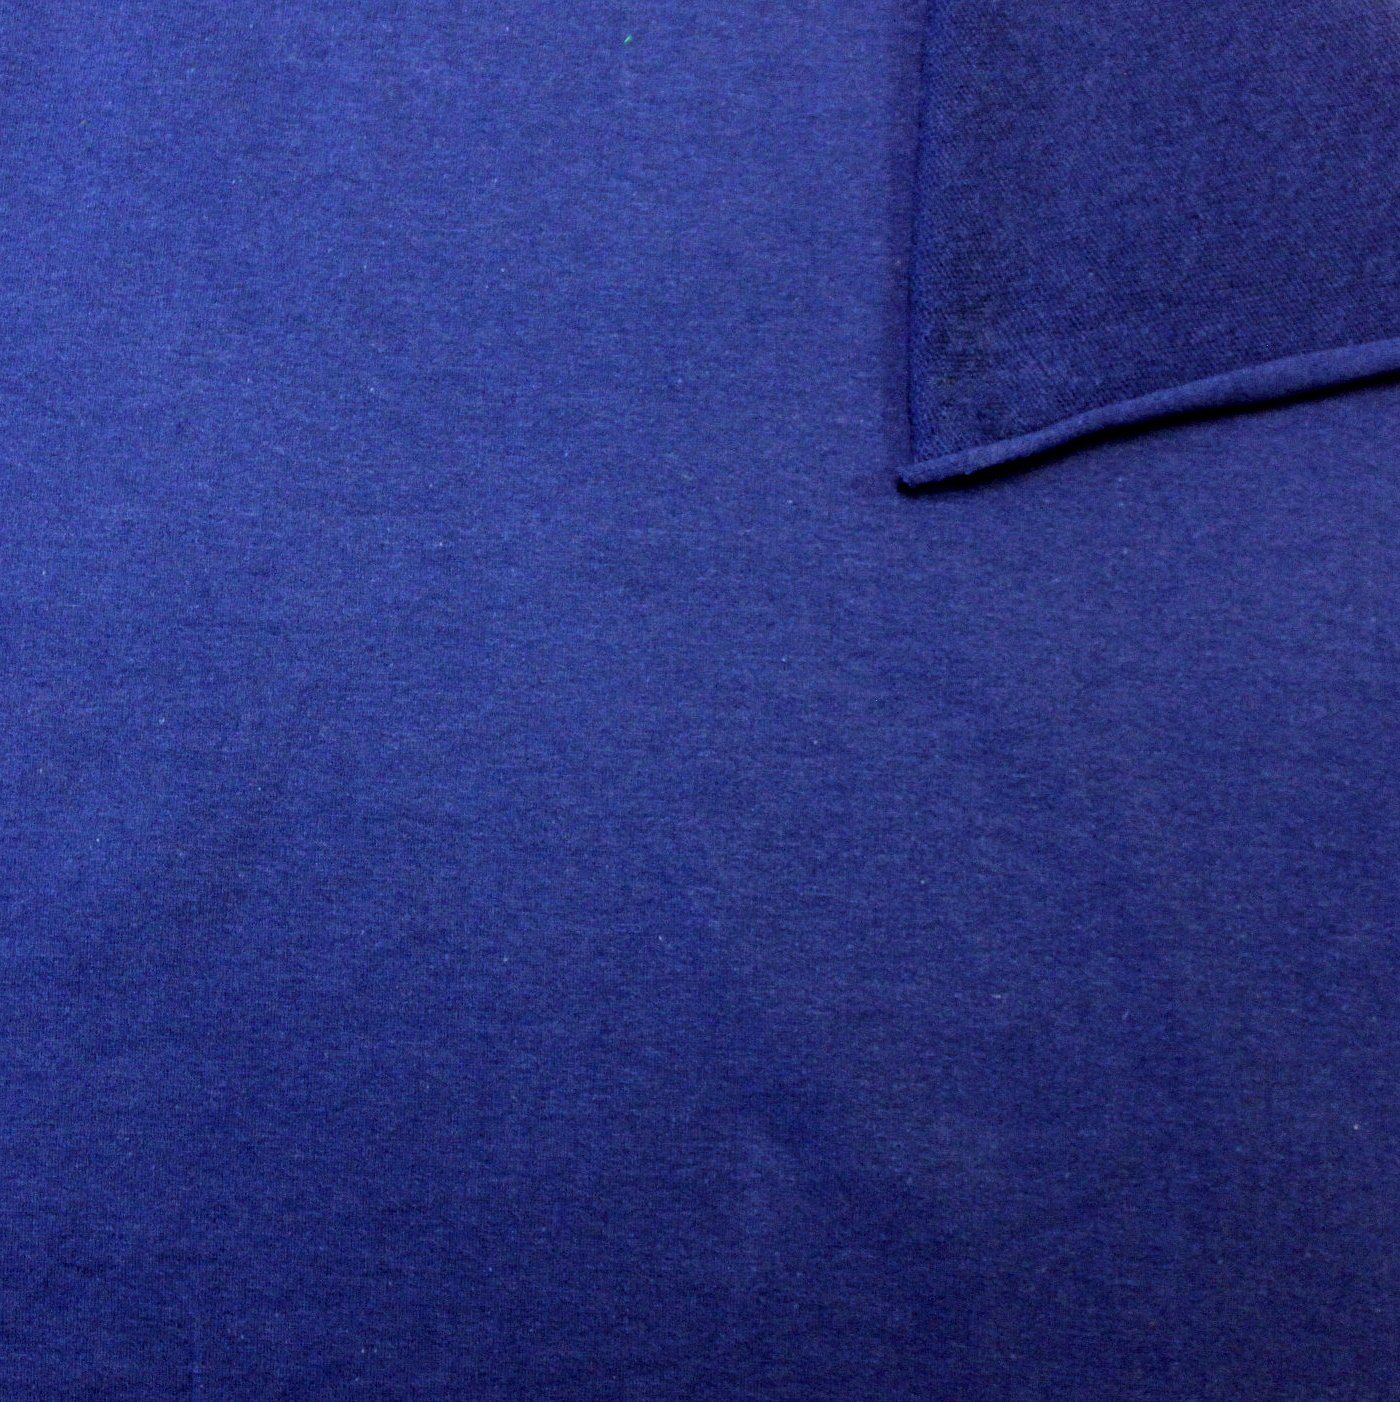 Royal Blue Stretch Crepe Fabric by the Yard